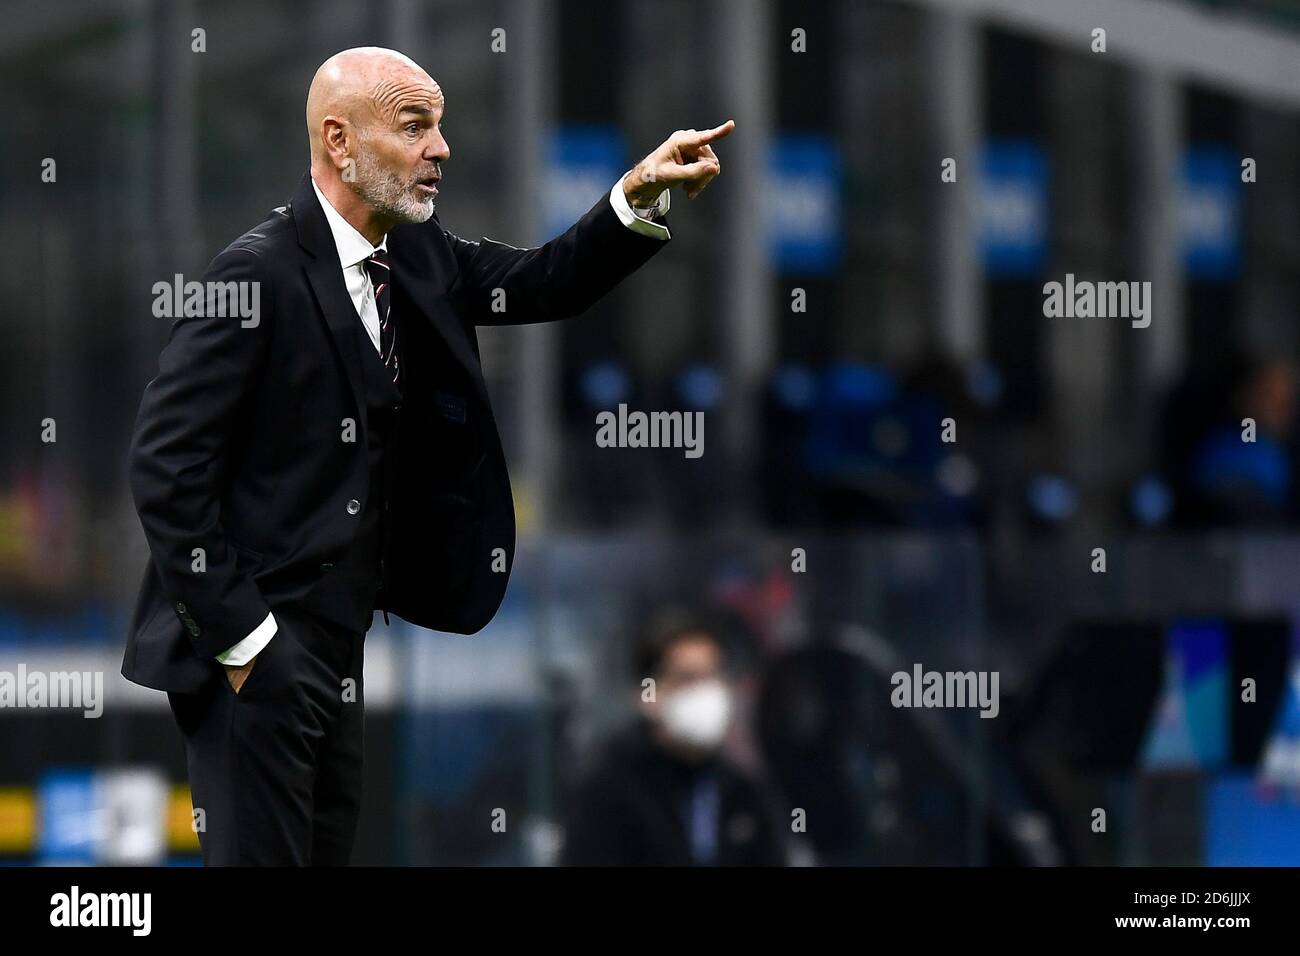 Milan, Italy - 17 October, 2020: Stefano Pioli, head coach of AC Milan,  gestures during the Serie